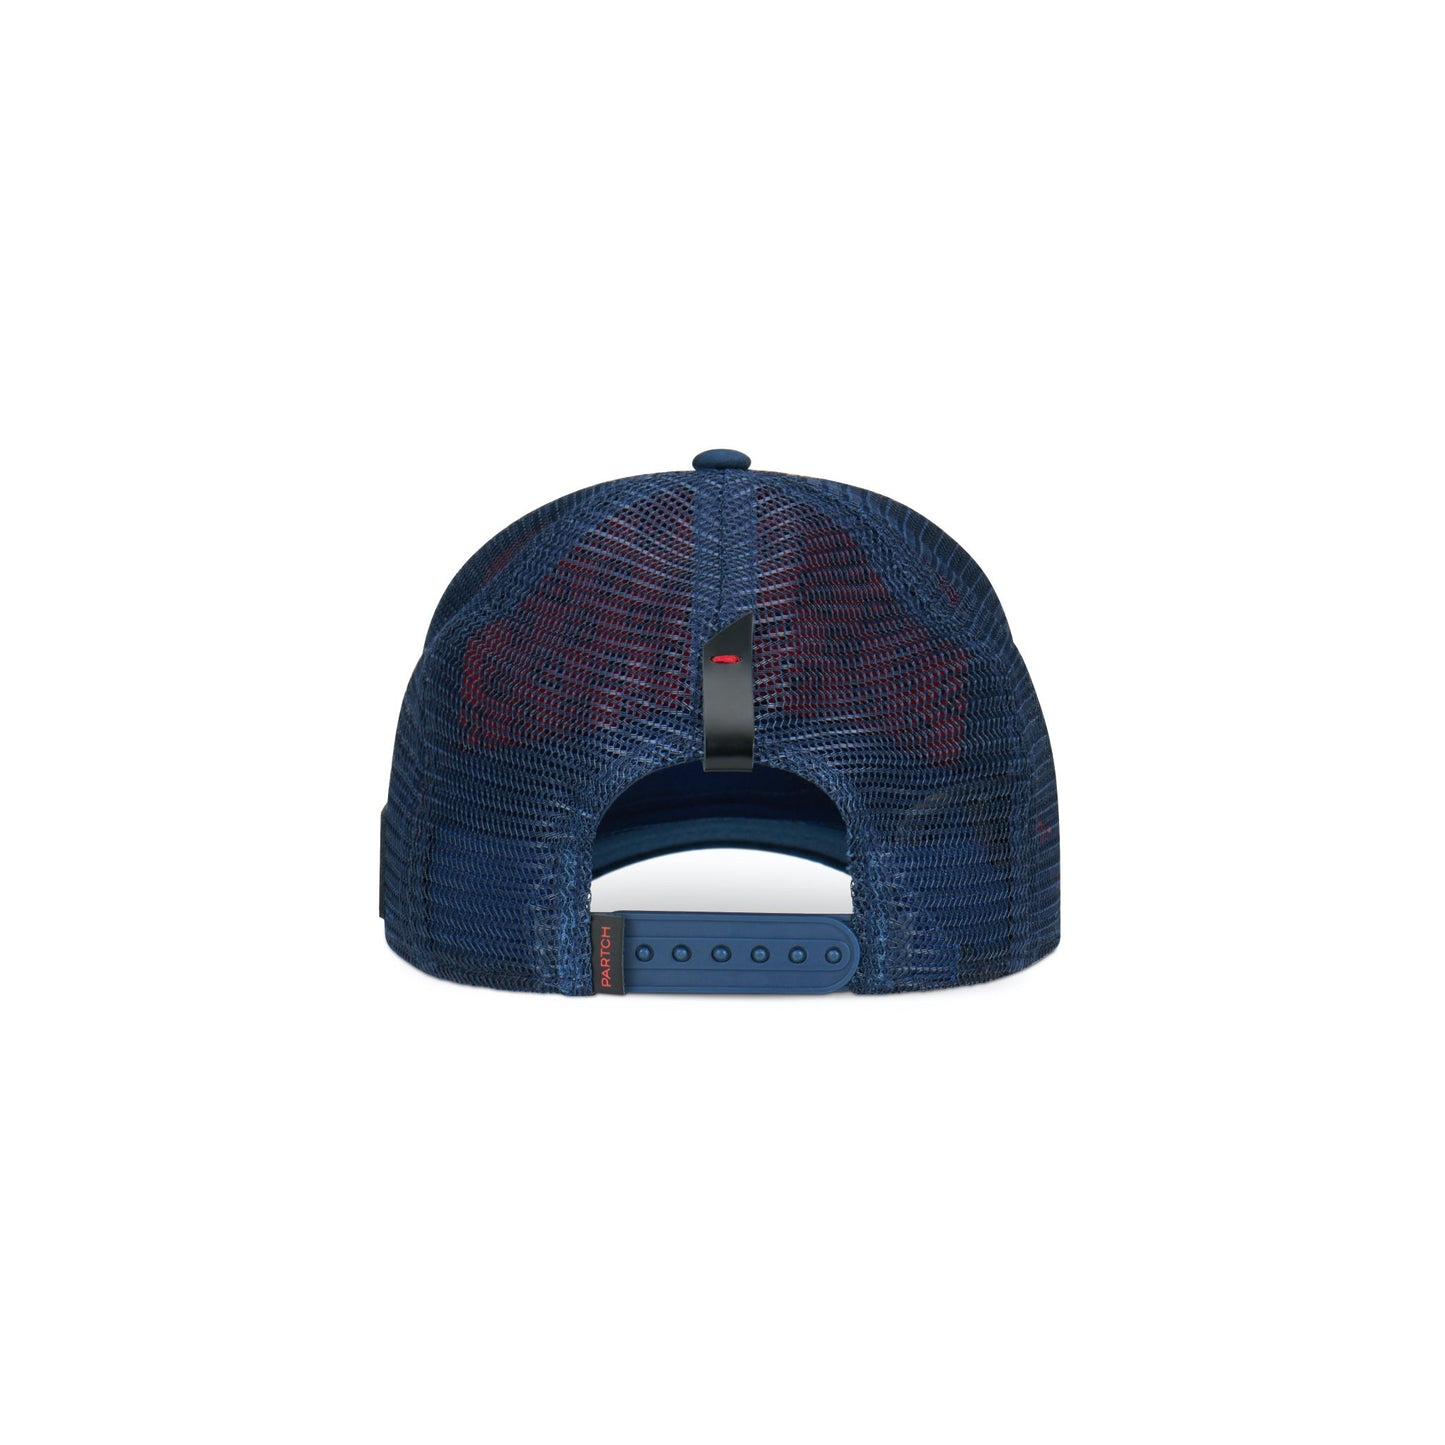 Partch snapback closure adjustable - Genuine leather accents